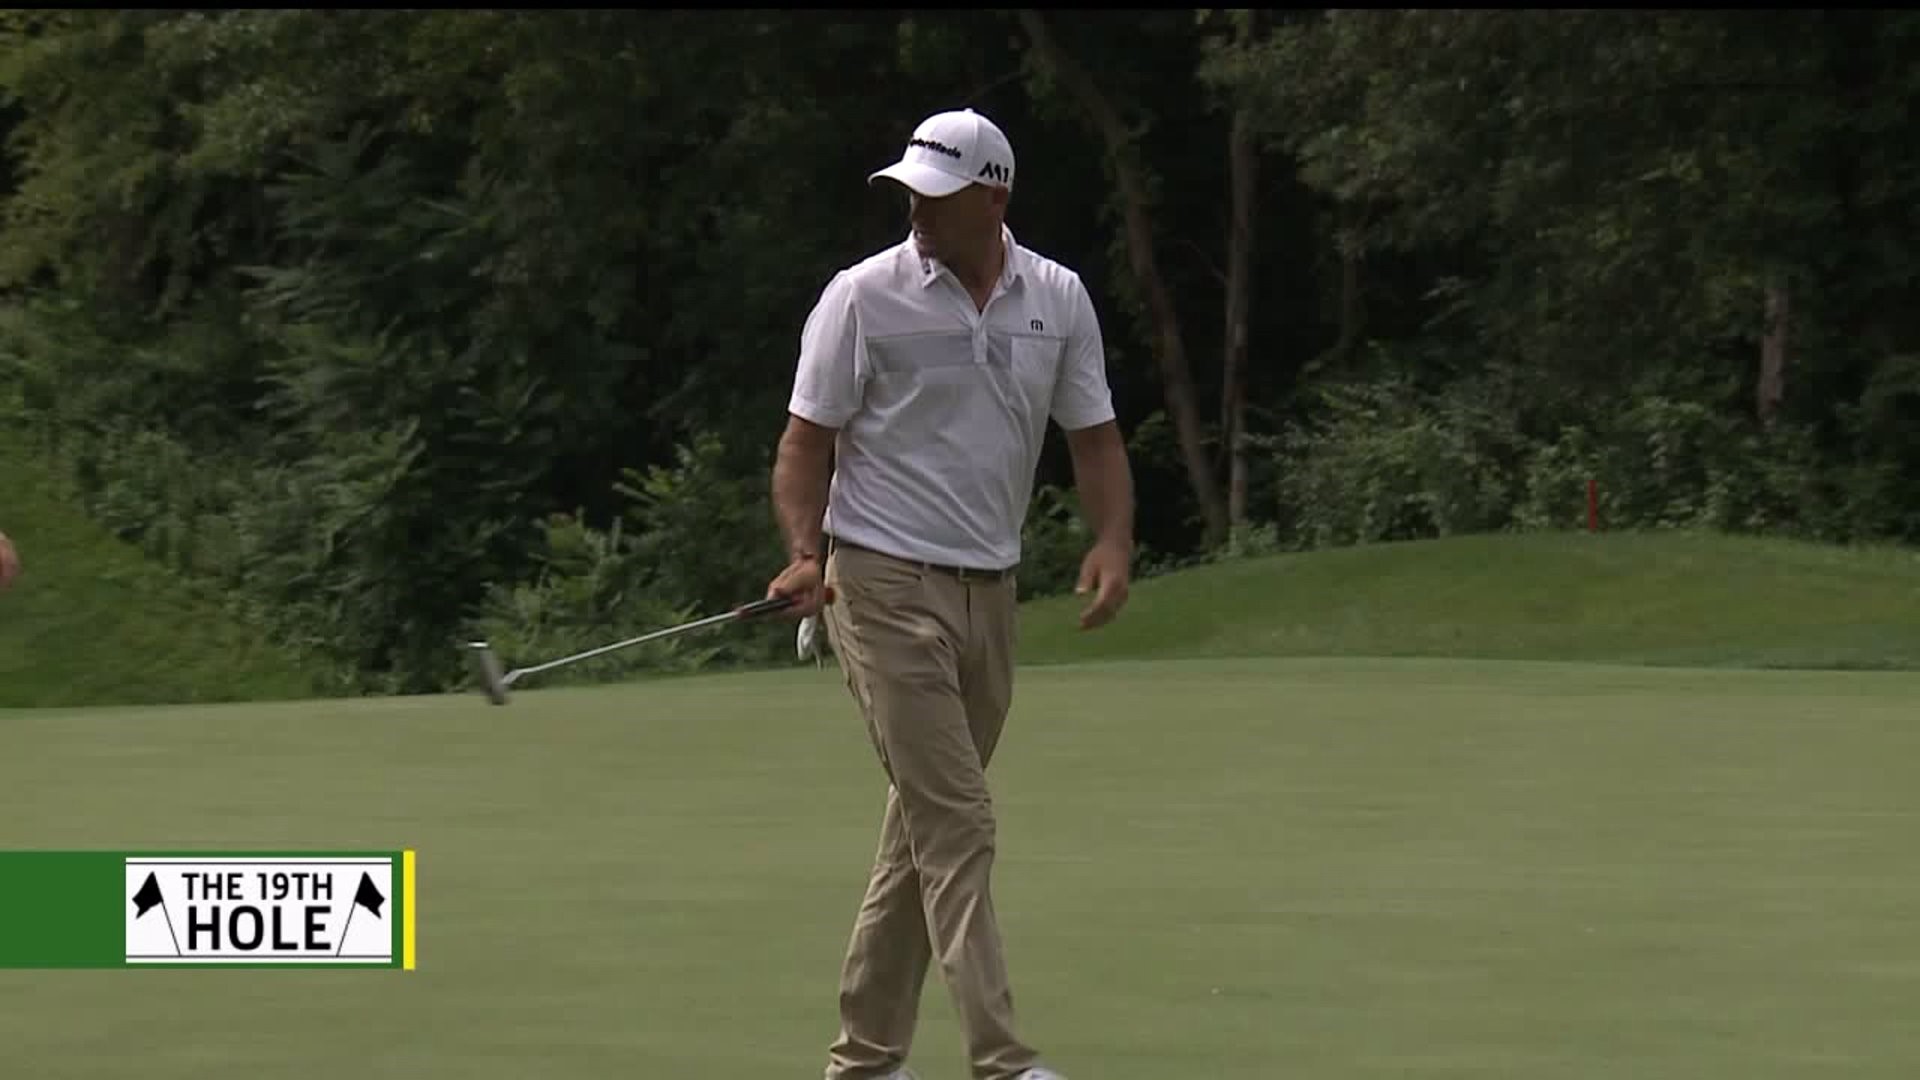 Putt of the Day: Sam Saunders